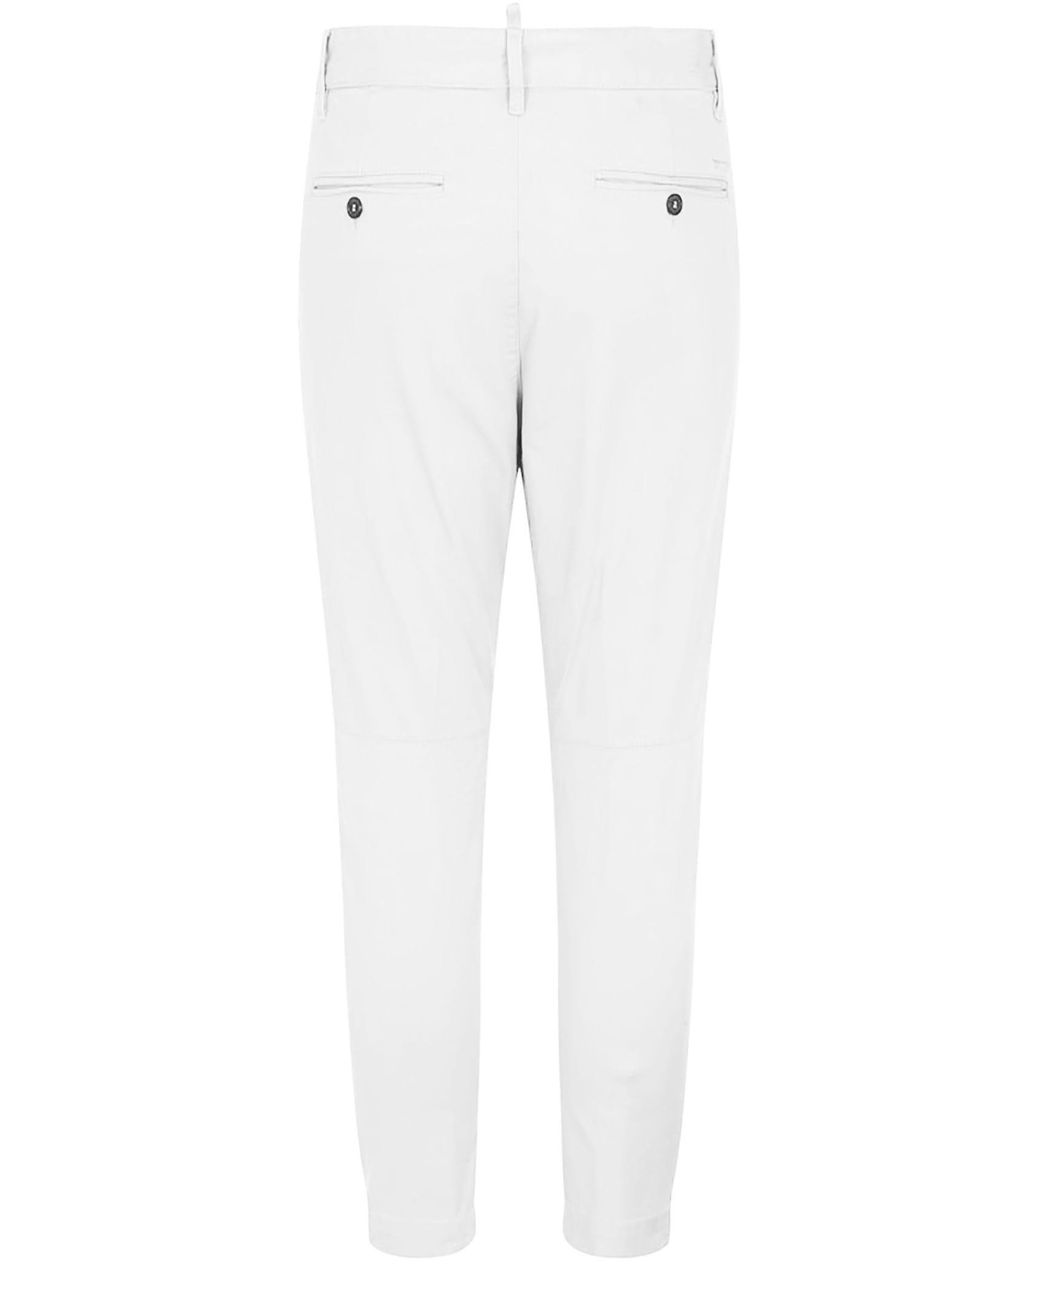 Slacks and Chinos Mens Trousers Slacks and Chinos DSquared² Trousers DSquared² Cotton Skinny-cut Gathered-design Trousers in White for Men Save 59% 